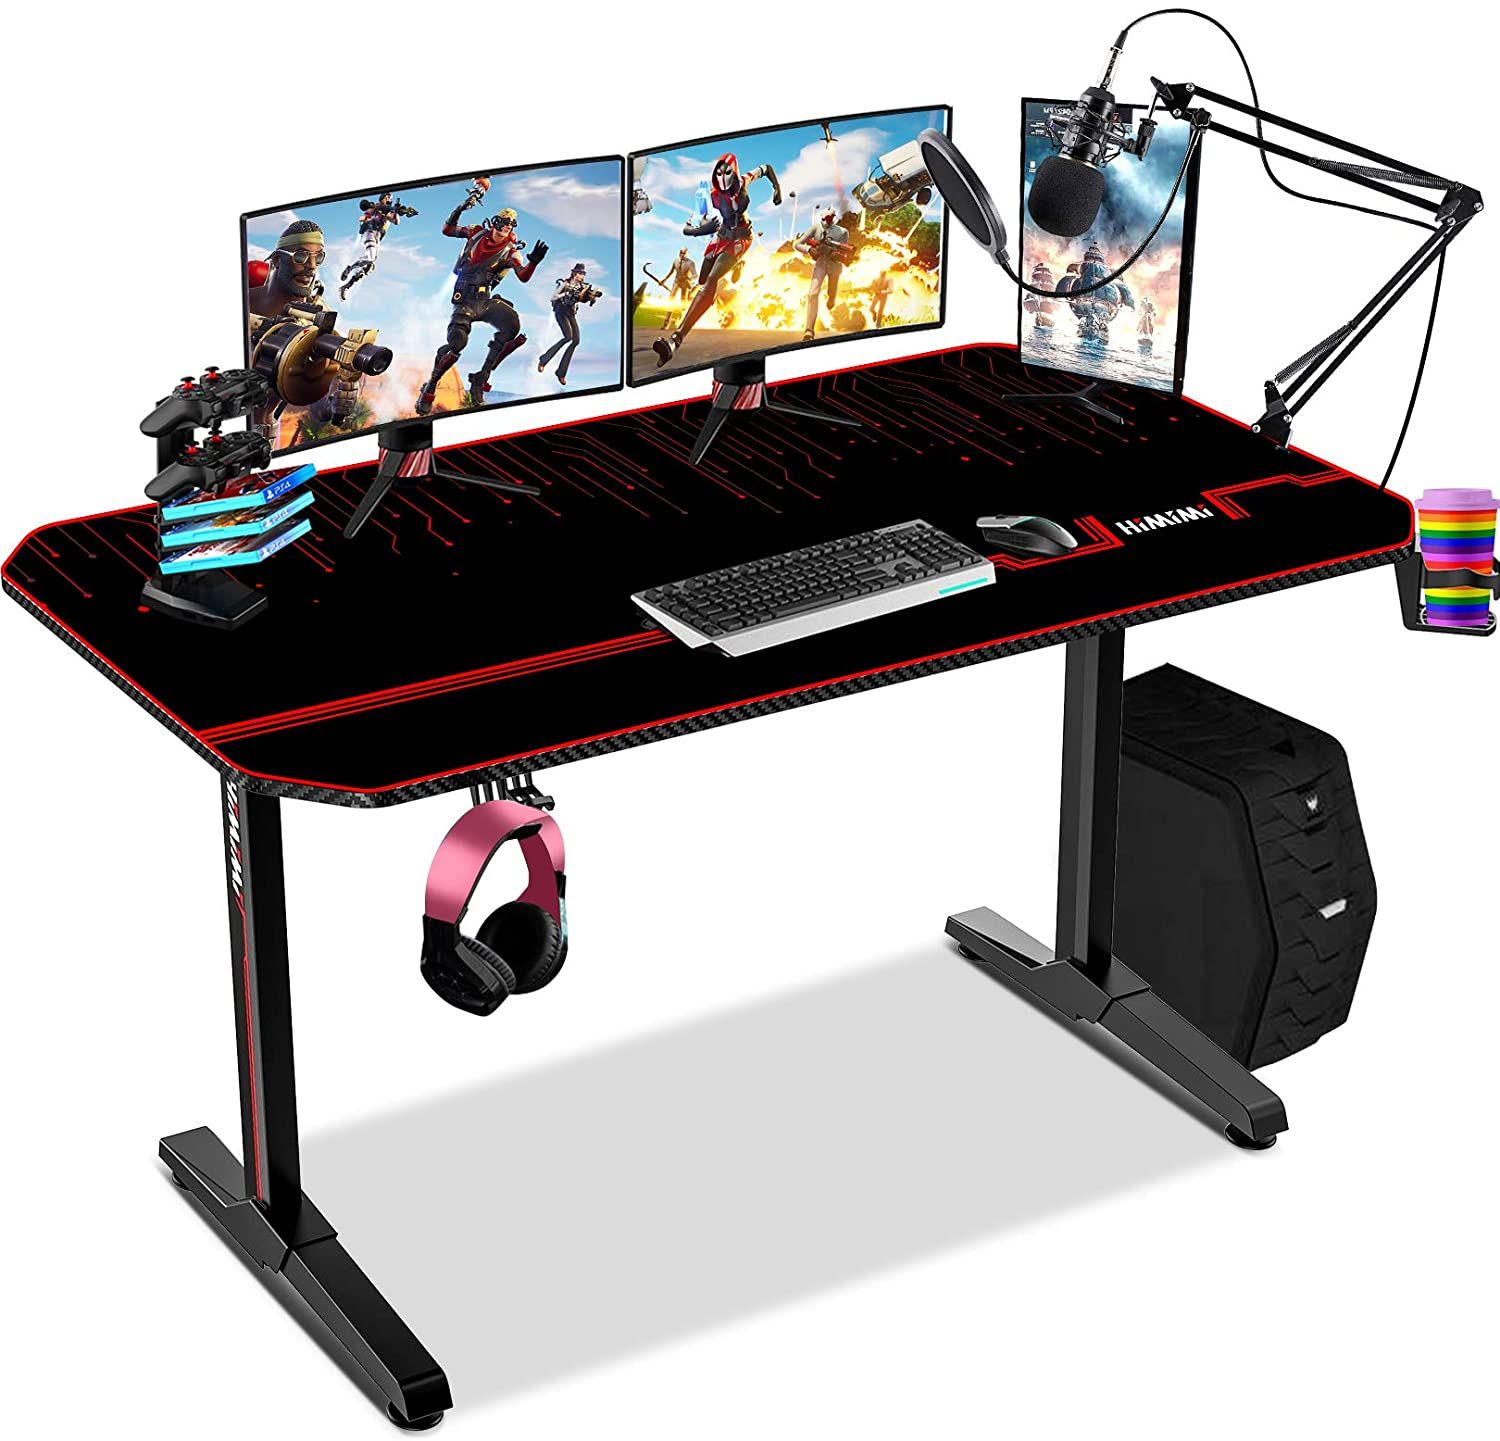 Buy Ergonomic Gaming Desk 55 Inch, T Shaped Computer Table With Free In Gaming Desks With Built In Outlets (View 1 of 15)